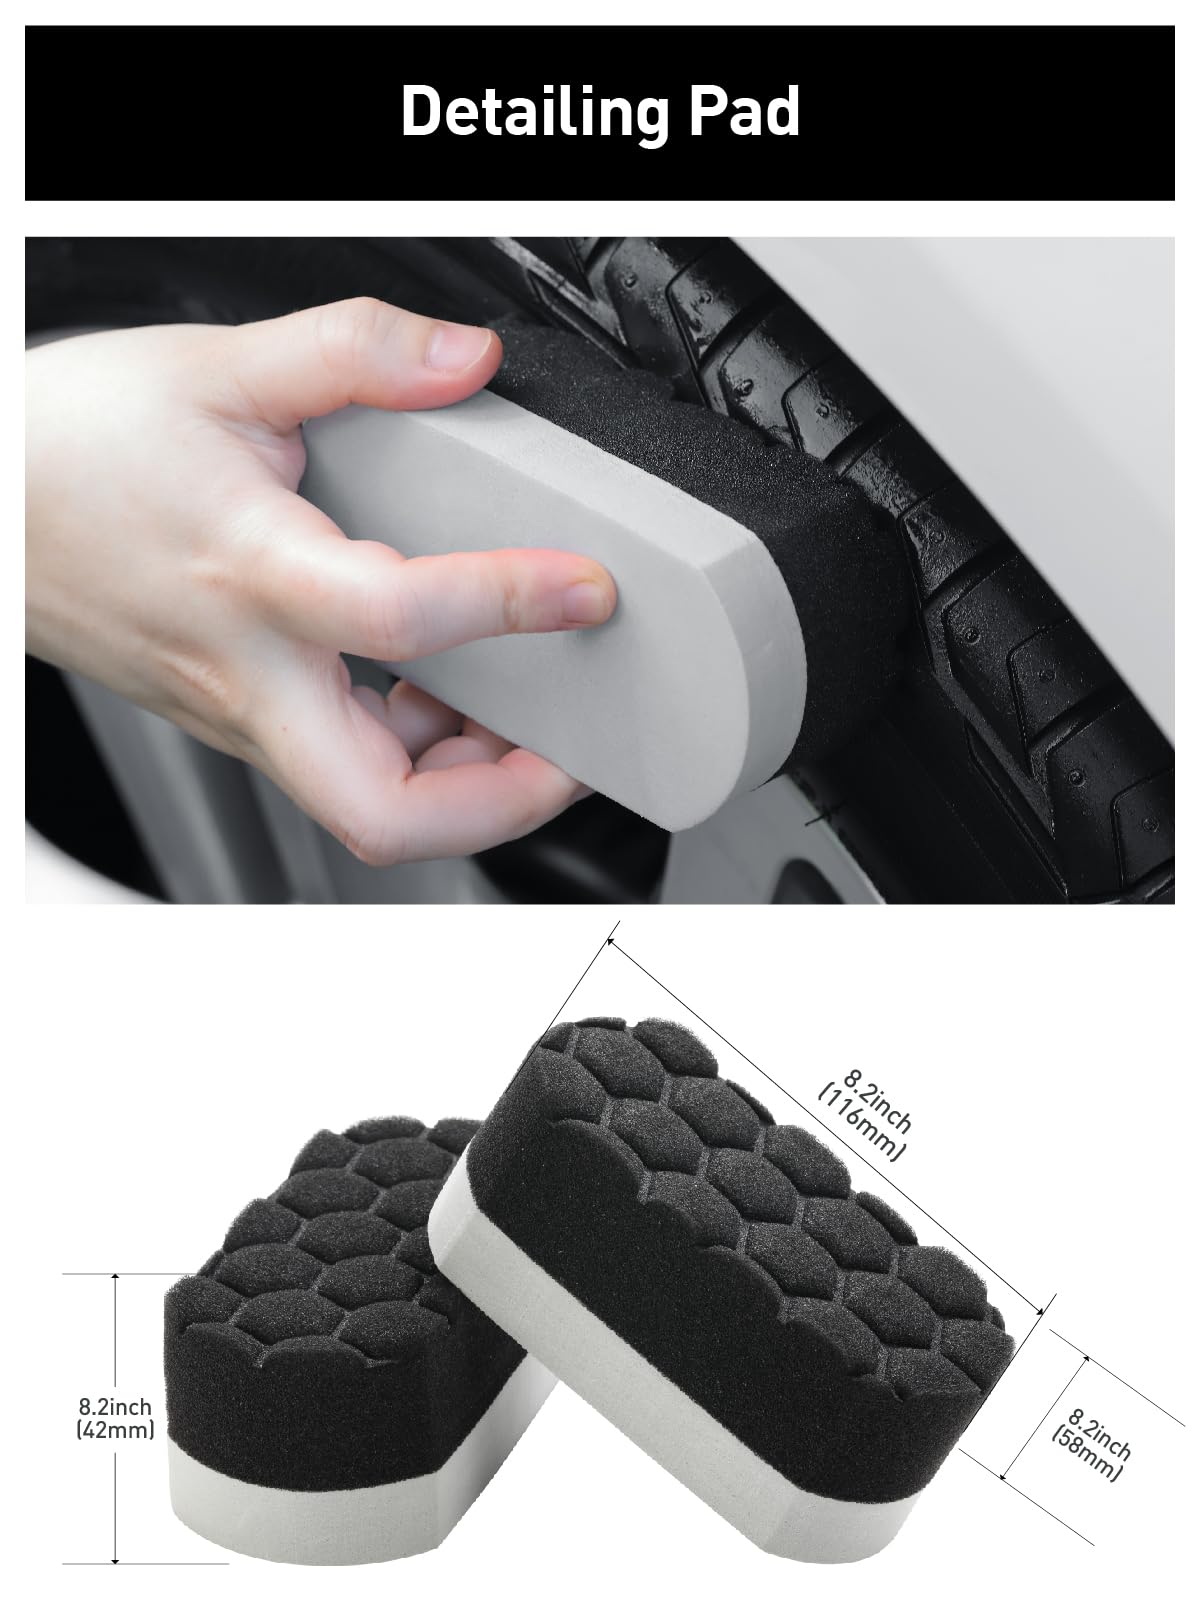 6PCS Car Wheel Cleaning Pro Kit, Microfiber Bendable Brush, Double-Ended Detailing Brush, and Detailing Pads, Scratch-Free & Multipurpose